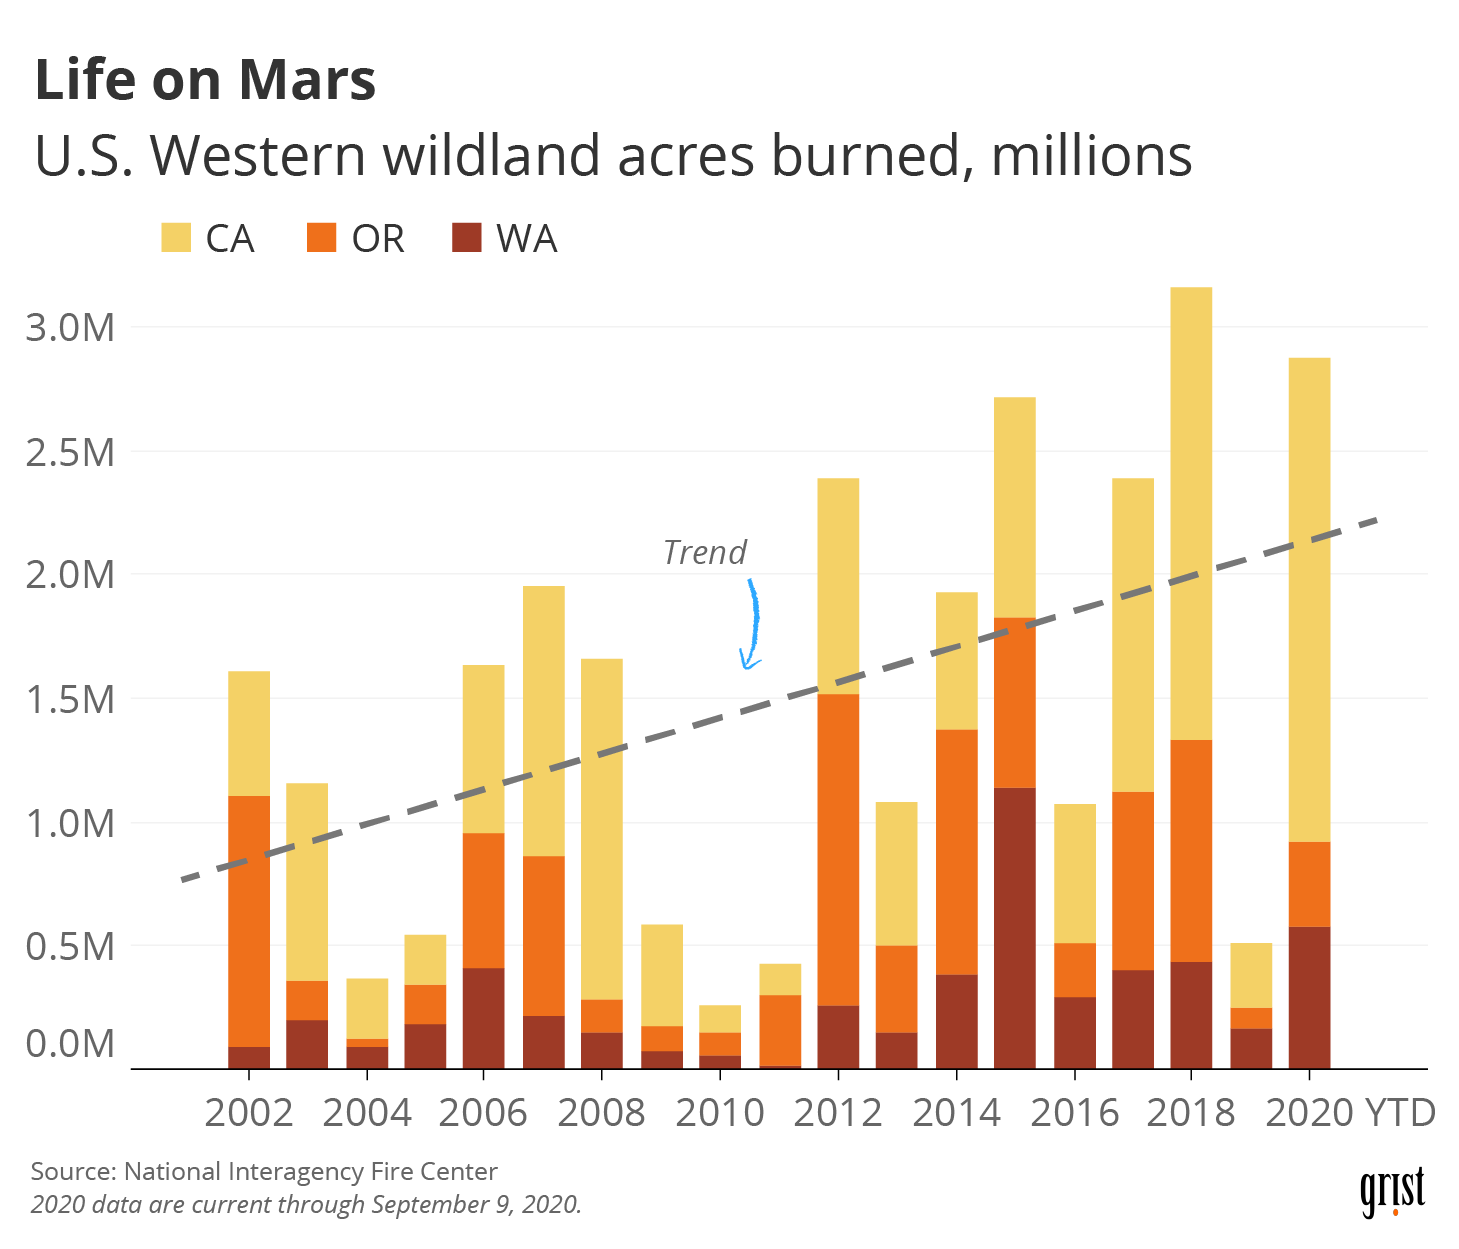 A bar chart showing U.S. Western wildland acres burned between 2002 and 2020 (YTD). A trend-line shows that acres burned have increased to approximately 3 million acres annually (up from about 1 million acres).